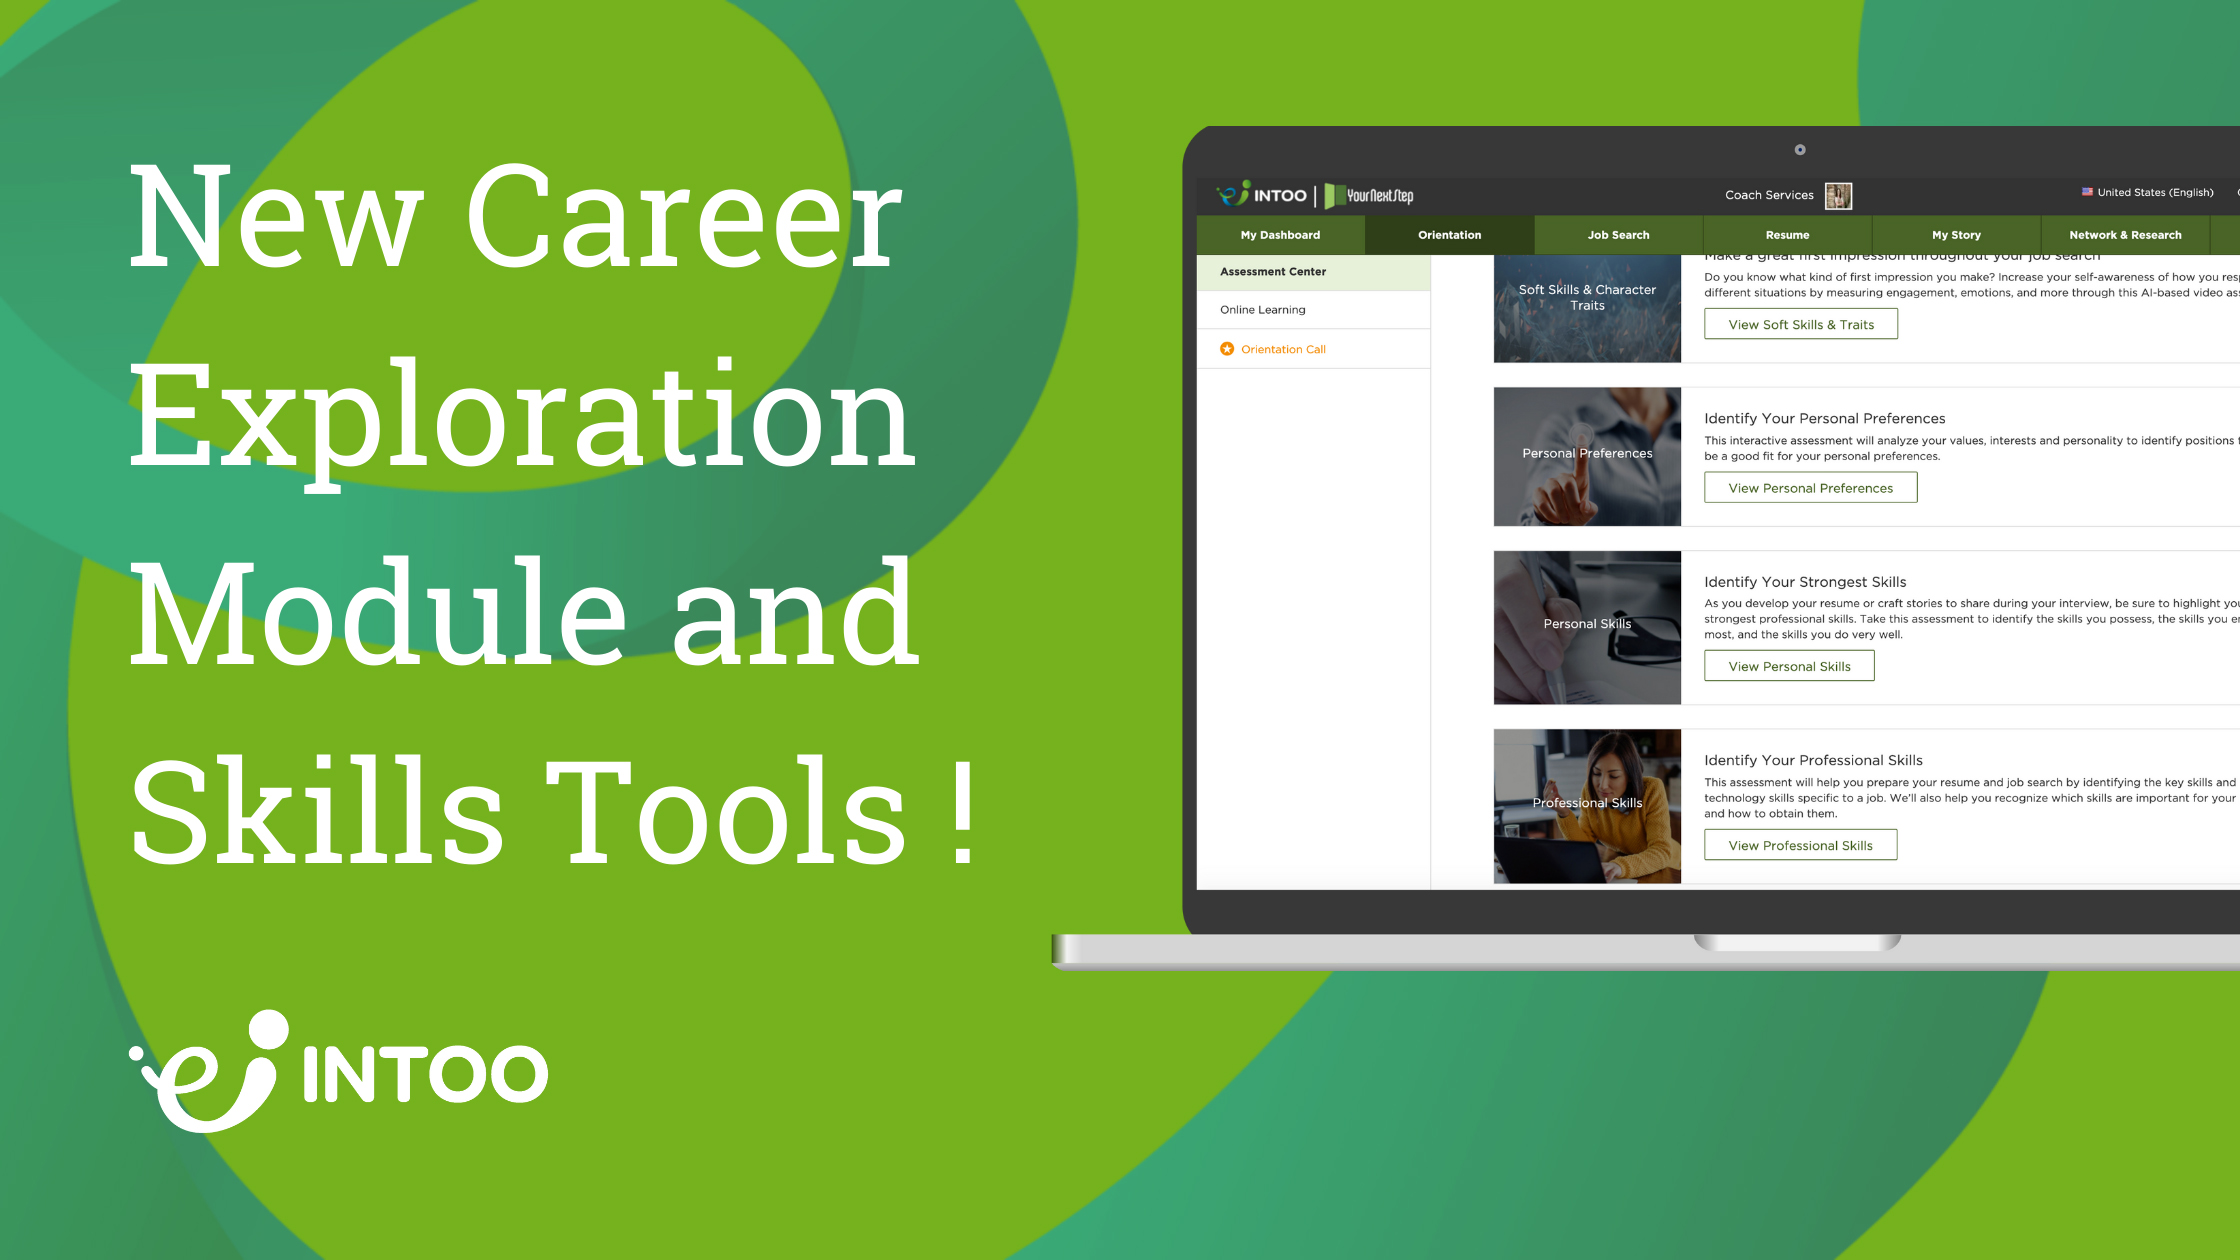 INTOO Integrates New Skills and Career Exploration Tools to Benefit Job Seekers